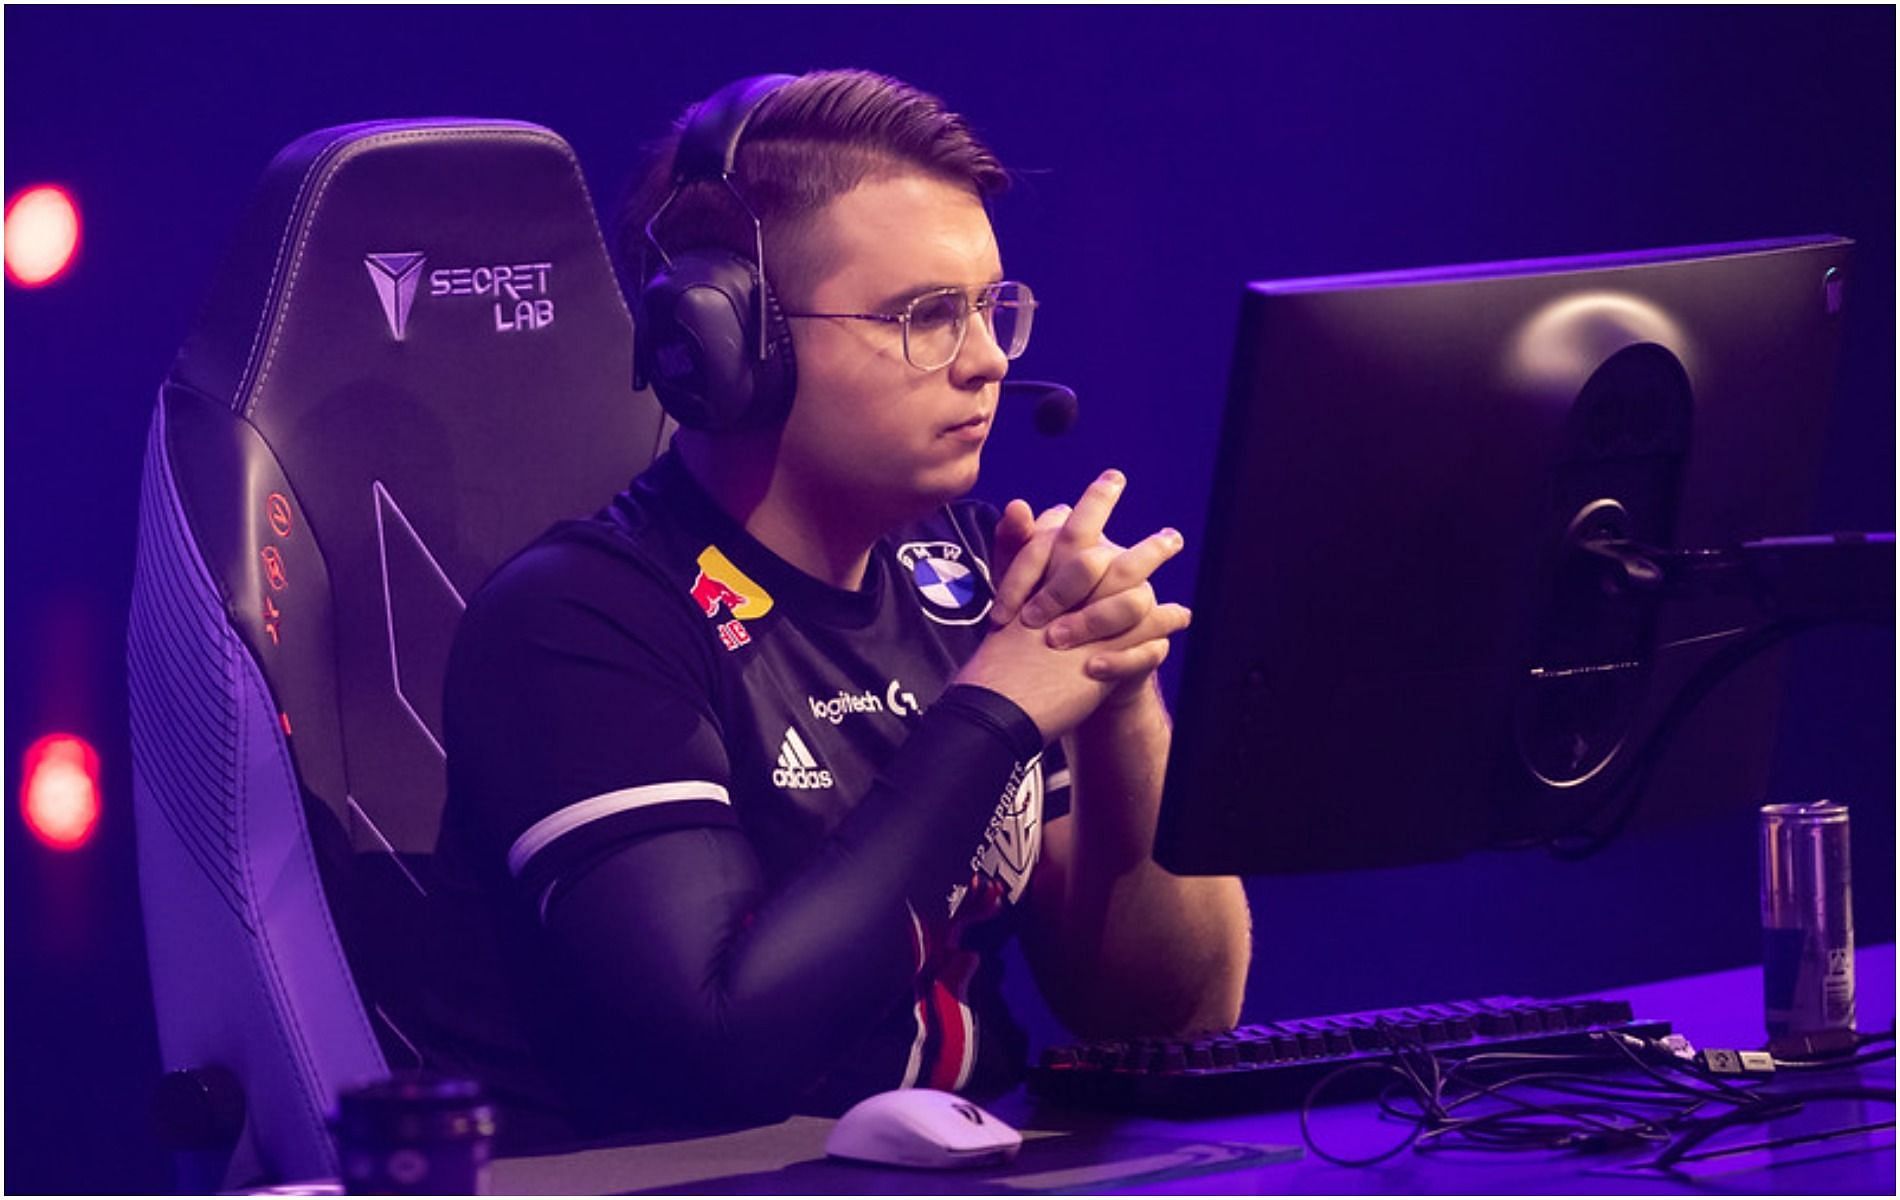 nukkye has opened up about the troubling G2 Esports Valorant roster situation (Image via G2 Esports)